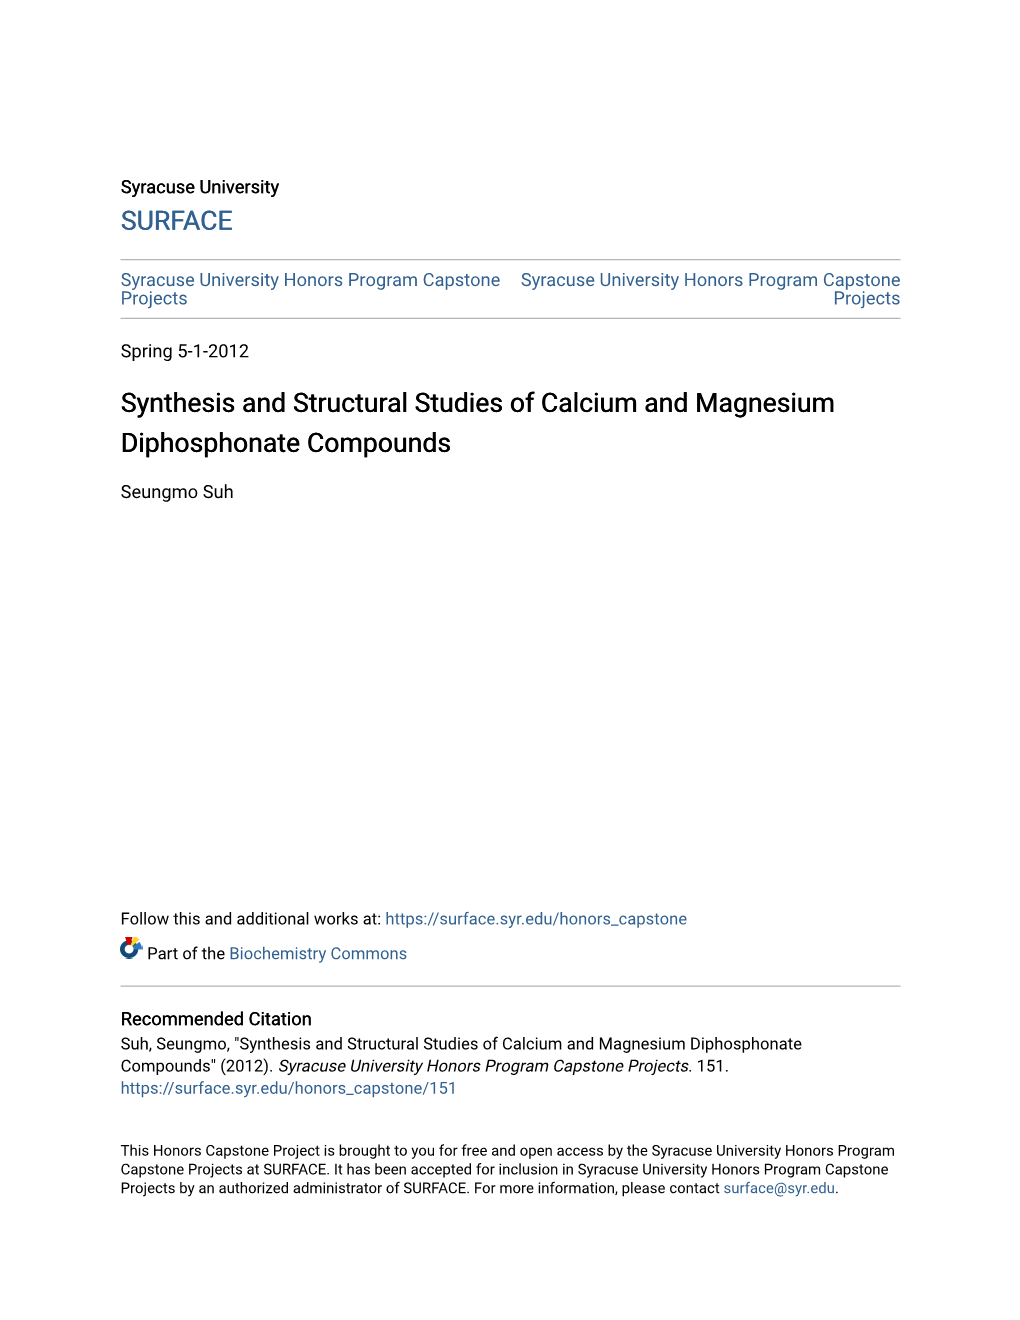 Synthesis and Structural Studies of Calcium and Magnesium Diphosphonate Compounds